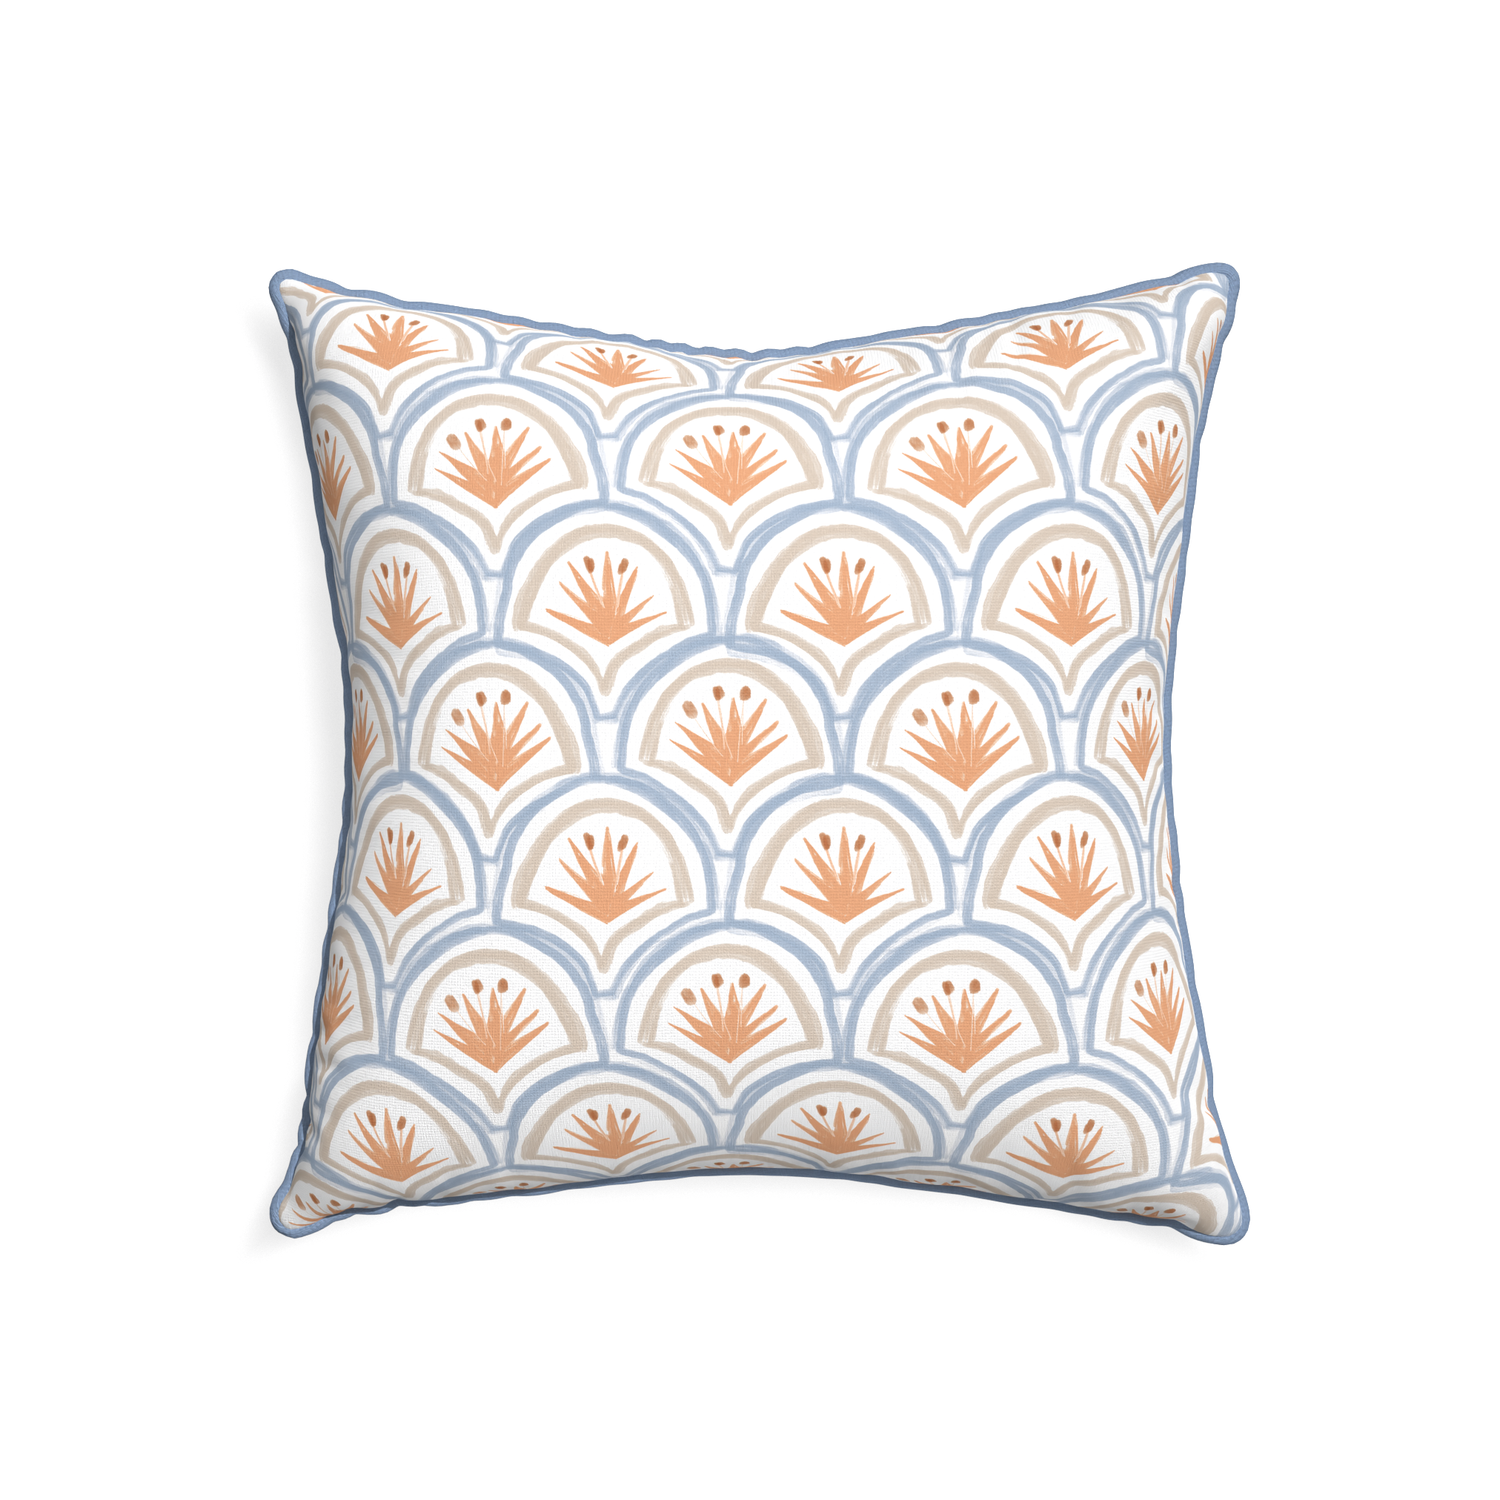 22-square thatcher apricot custom pillow with sky piping on white background